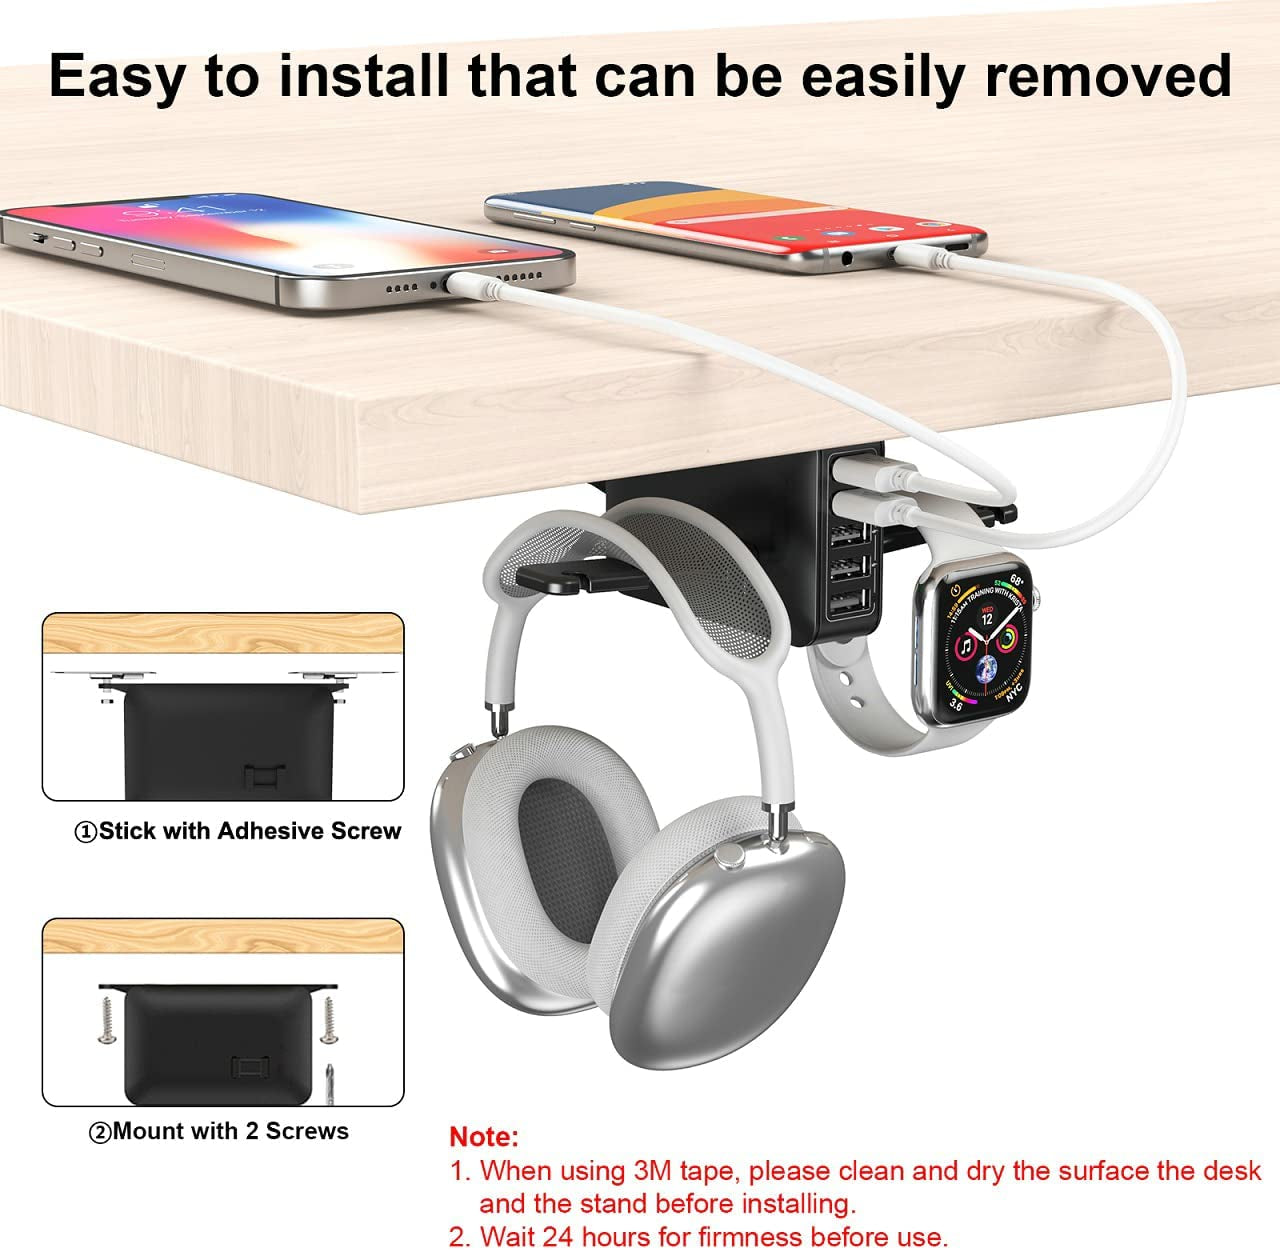 Dual Headphone Stand with USB Charging Station - PC Gaming Headphone Holder and Hanger Hook Stand for Under Desk